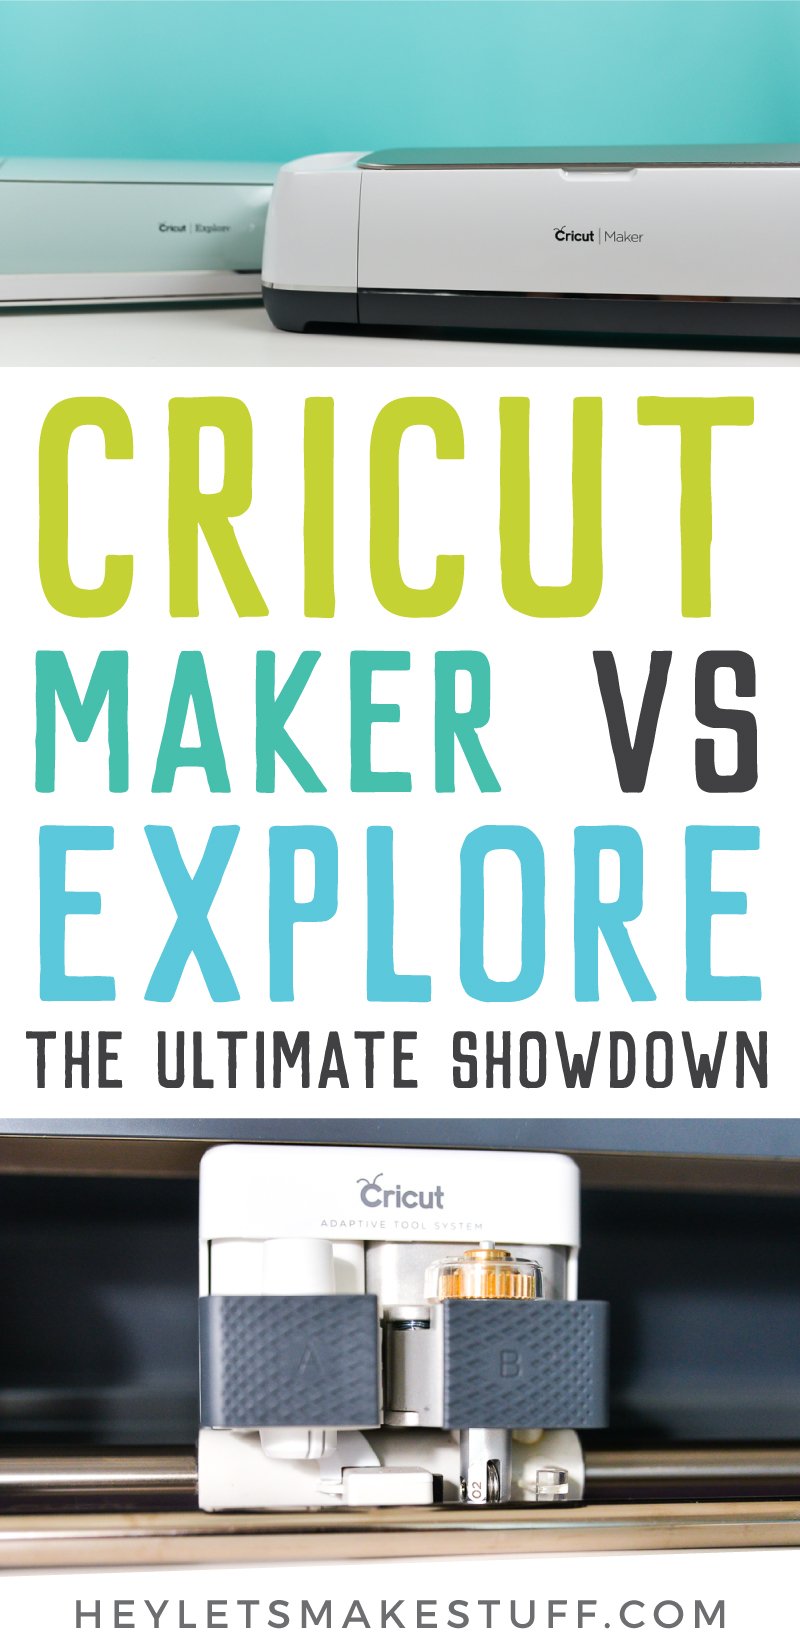 Pictures of the Cricut Maker and the Cricut Explore with advertising from HEYLETSMAKESTUFF.COM for Cricut Maker vs Explore - The Ultimate Showdown